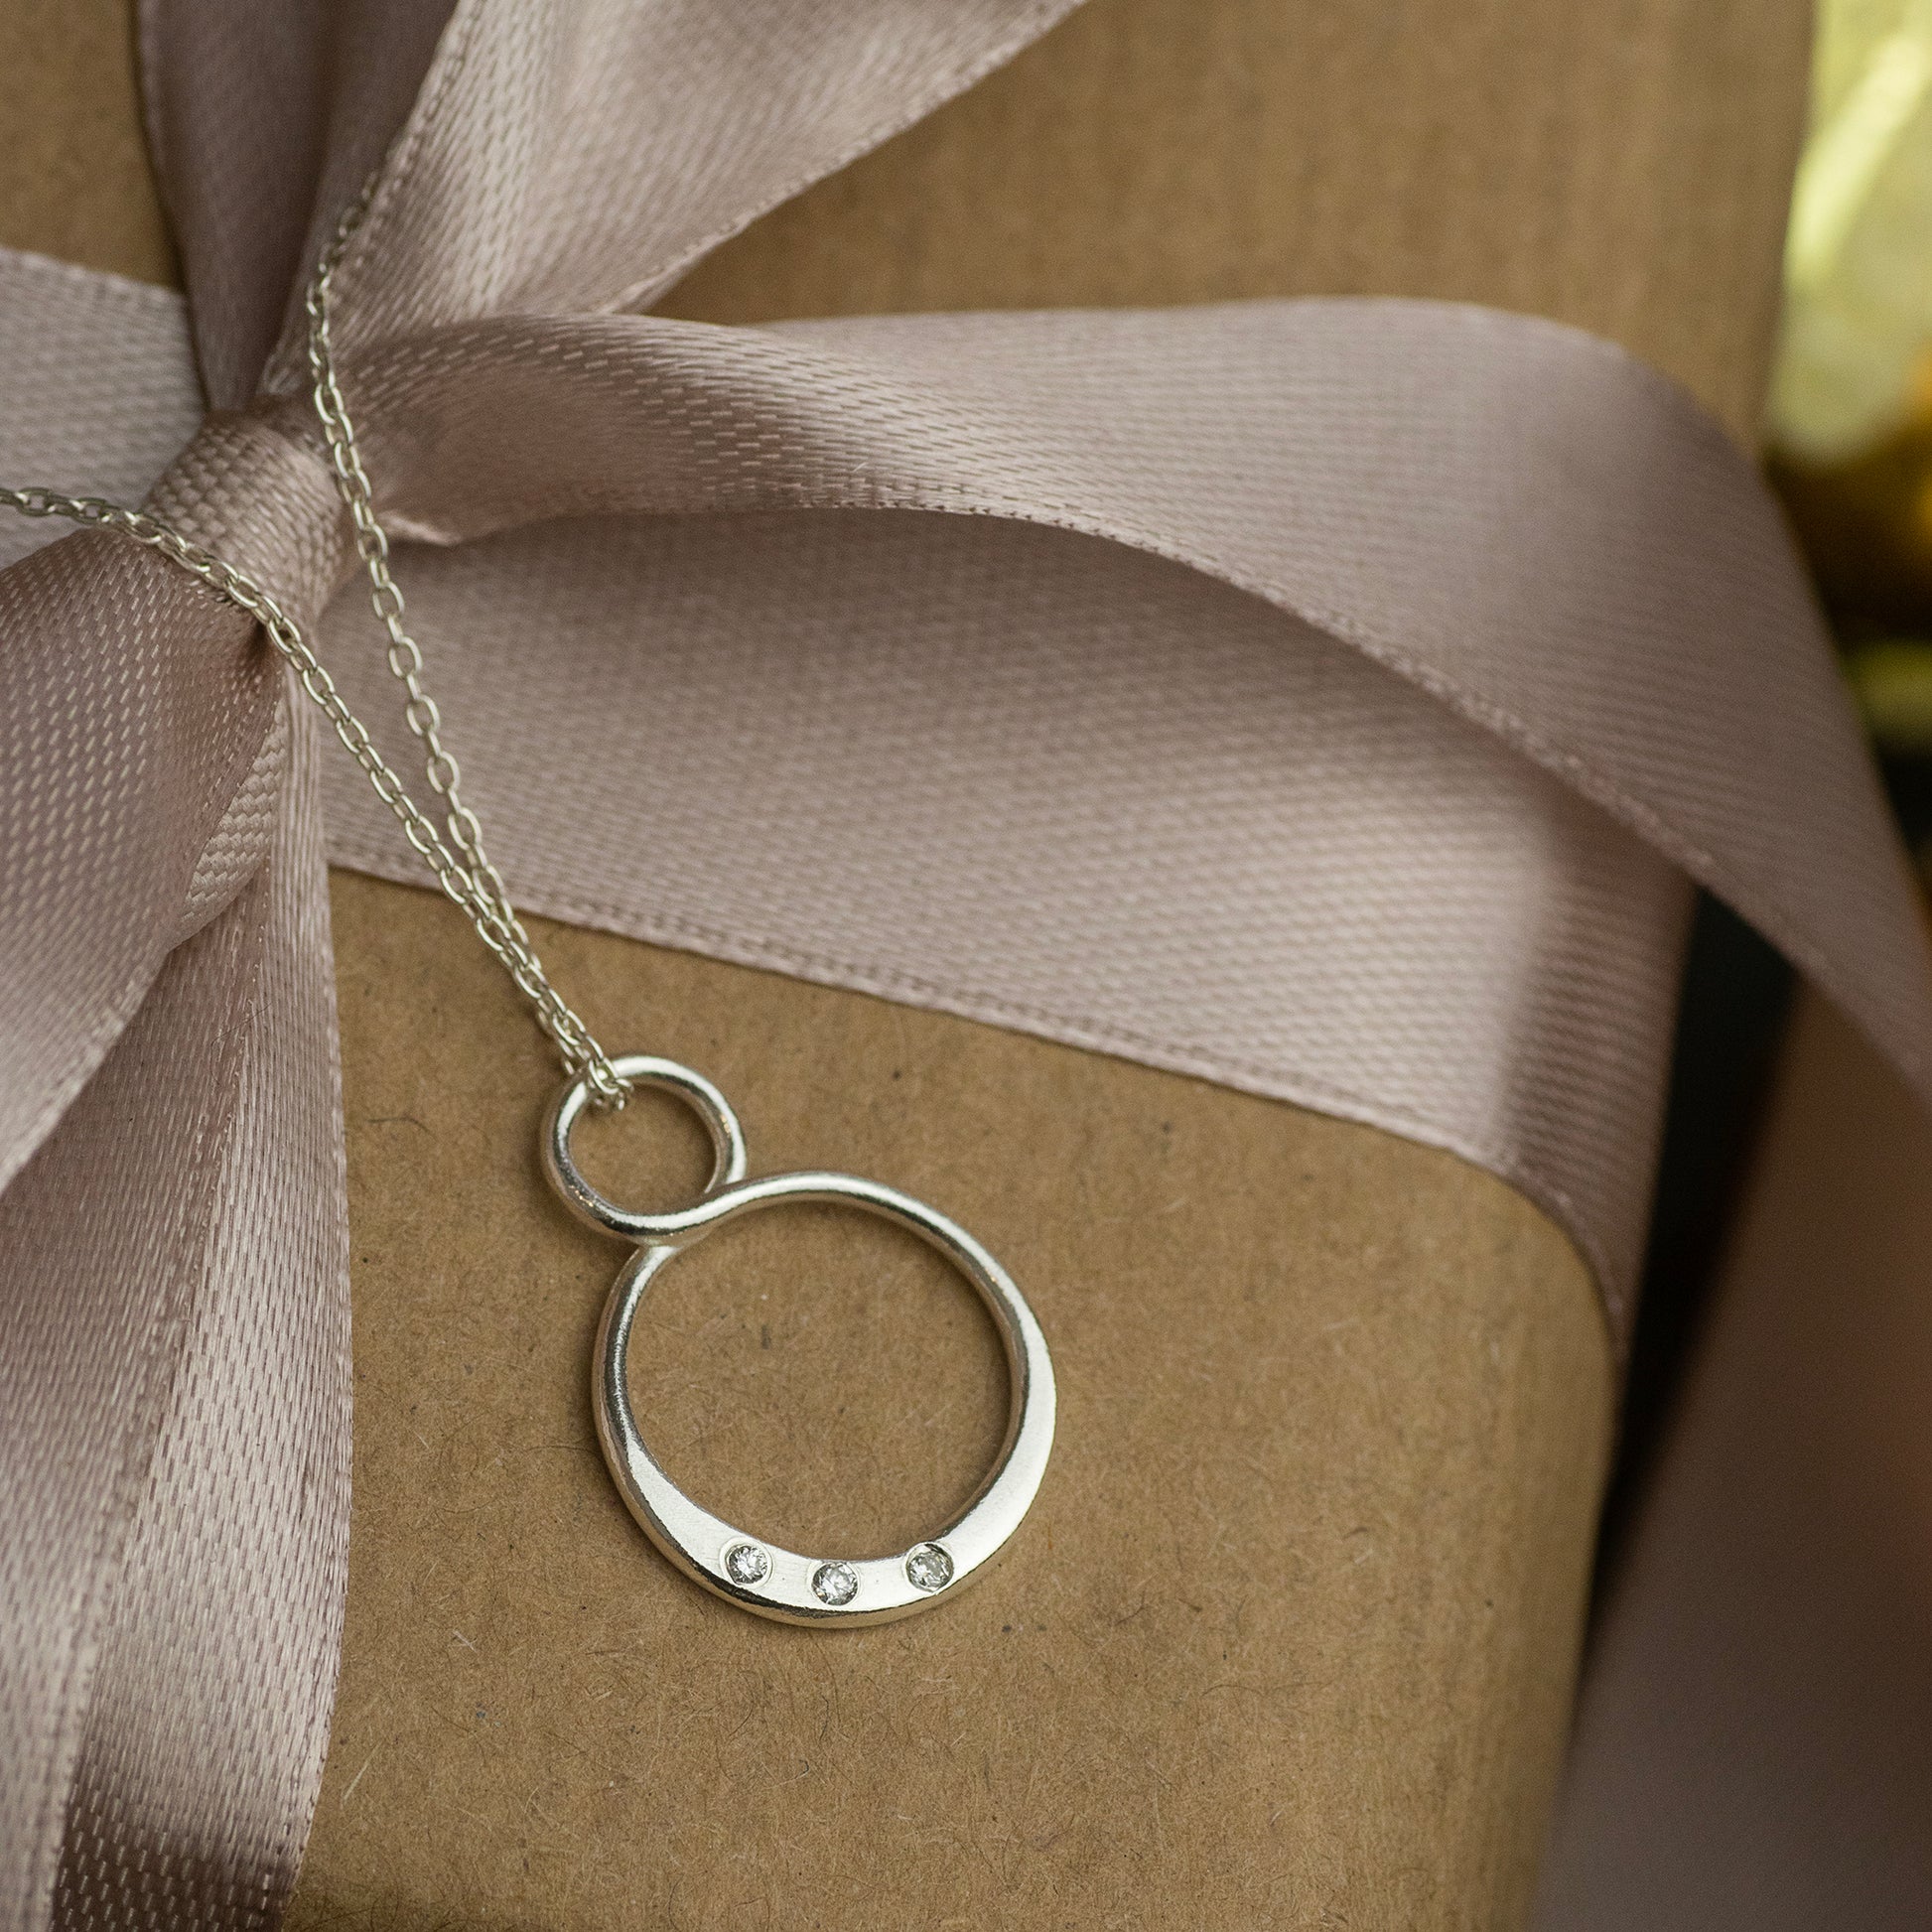 3 Sisters Necklace - Petite Diamond Infinity Necklace - Silver